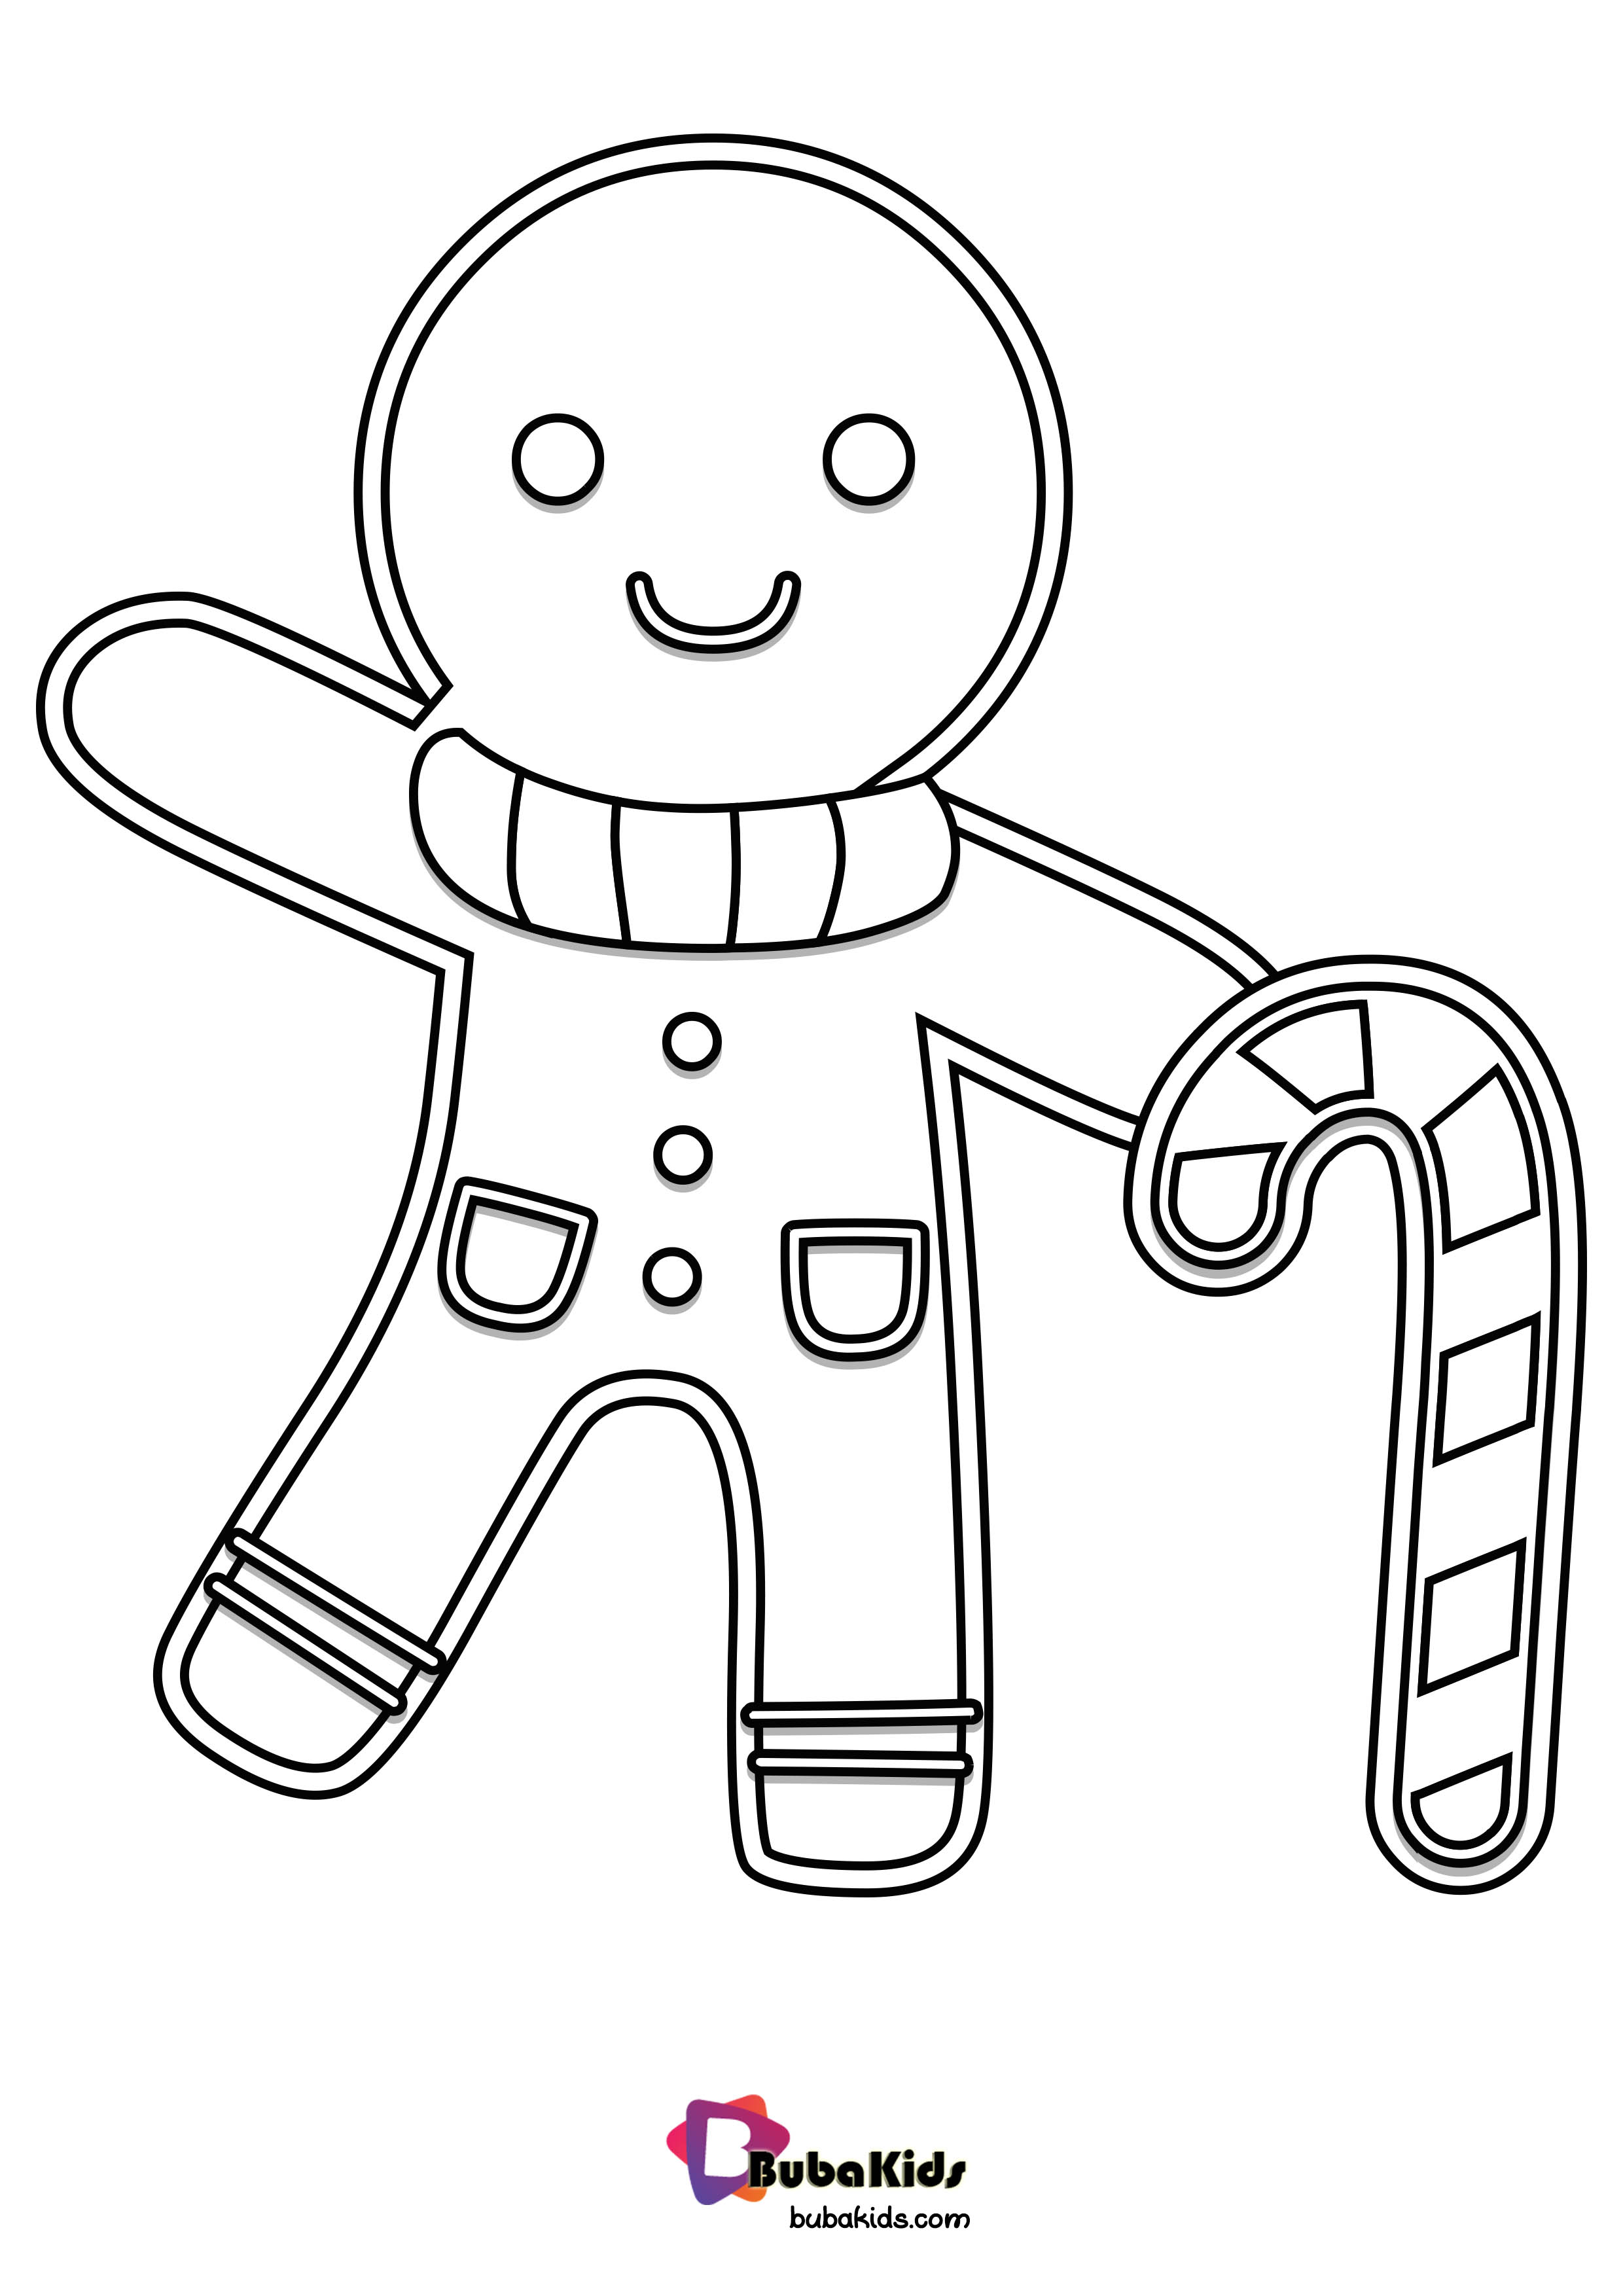 Gingerbread Coloring Page Download And Color it.! Wallpaper